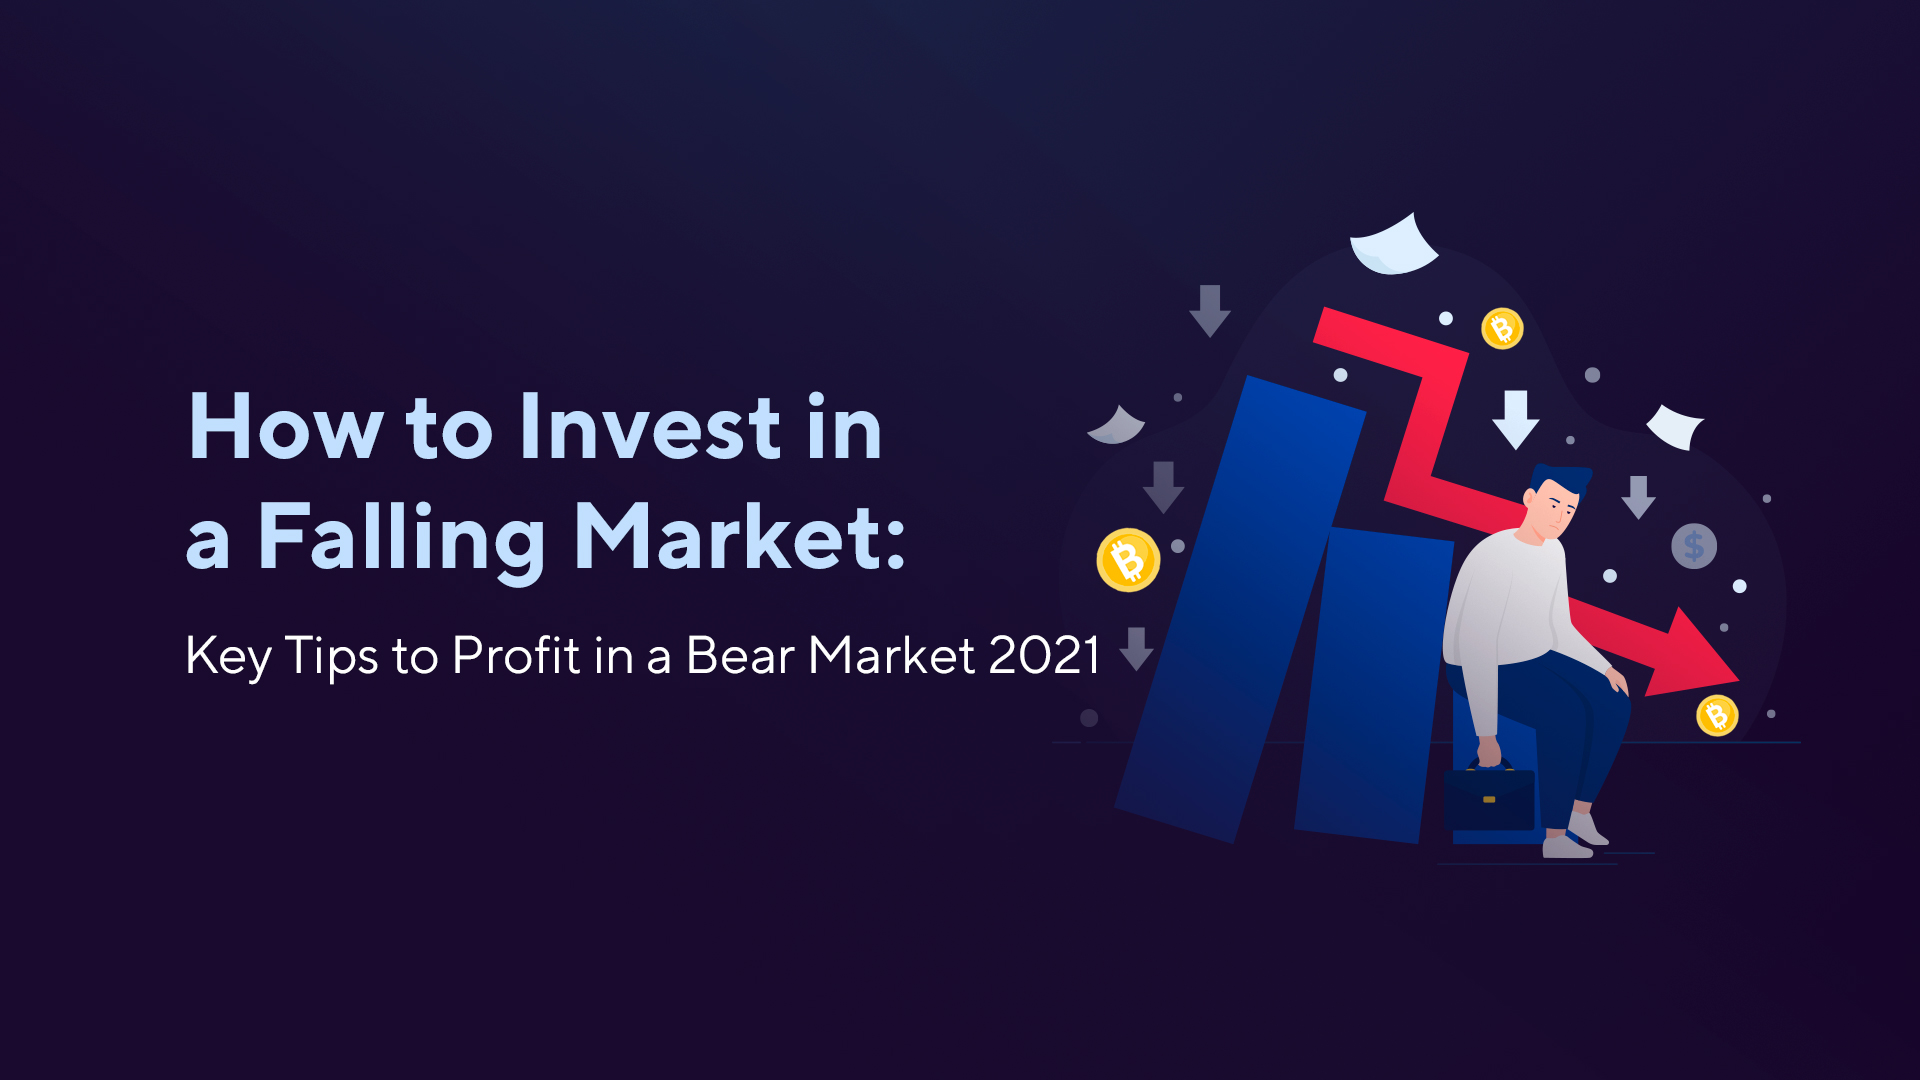 How to Invest in a Falling Market: Key Tips to Profit in a Bear Market 2021